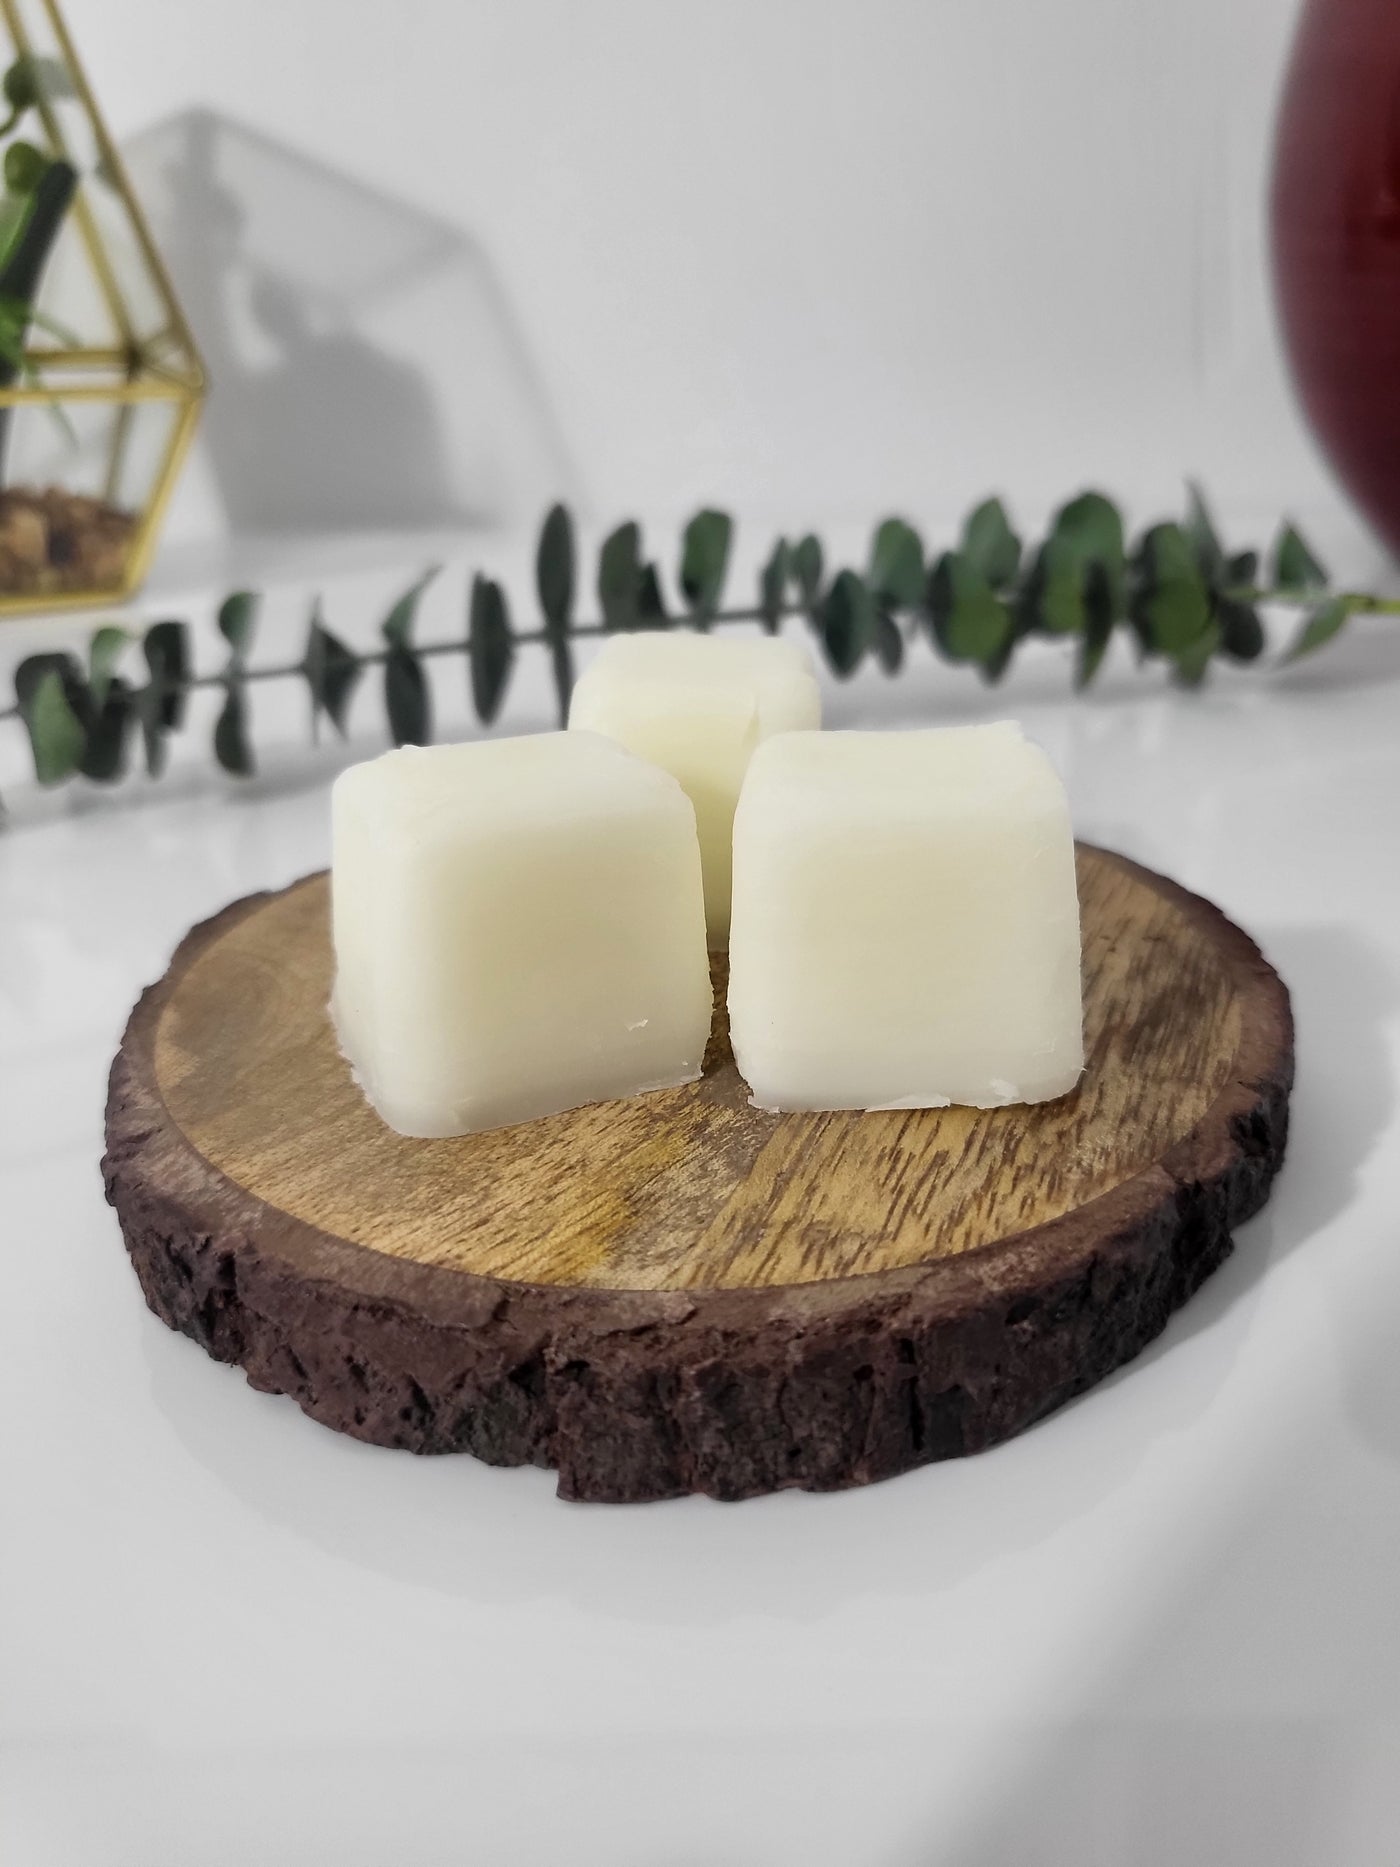 Tart Wax TW-30 (All Natural Soy Wax for Wax Melts)